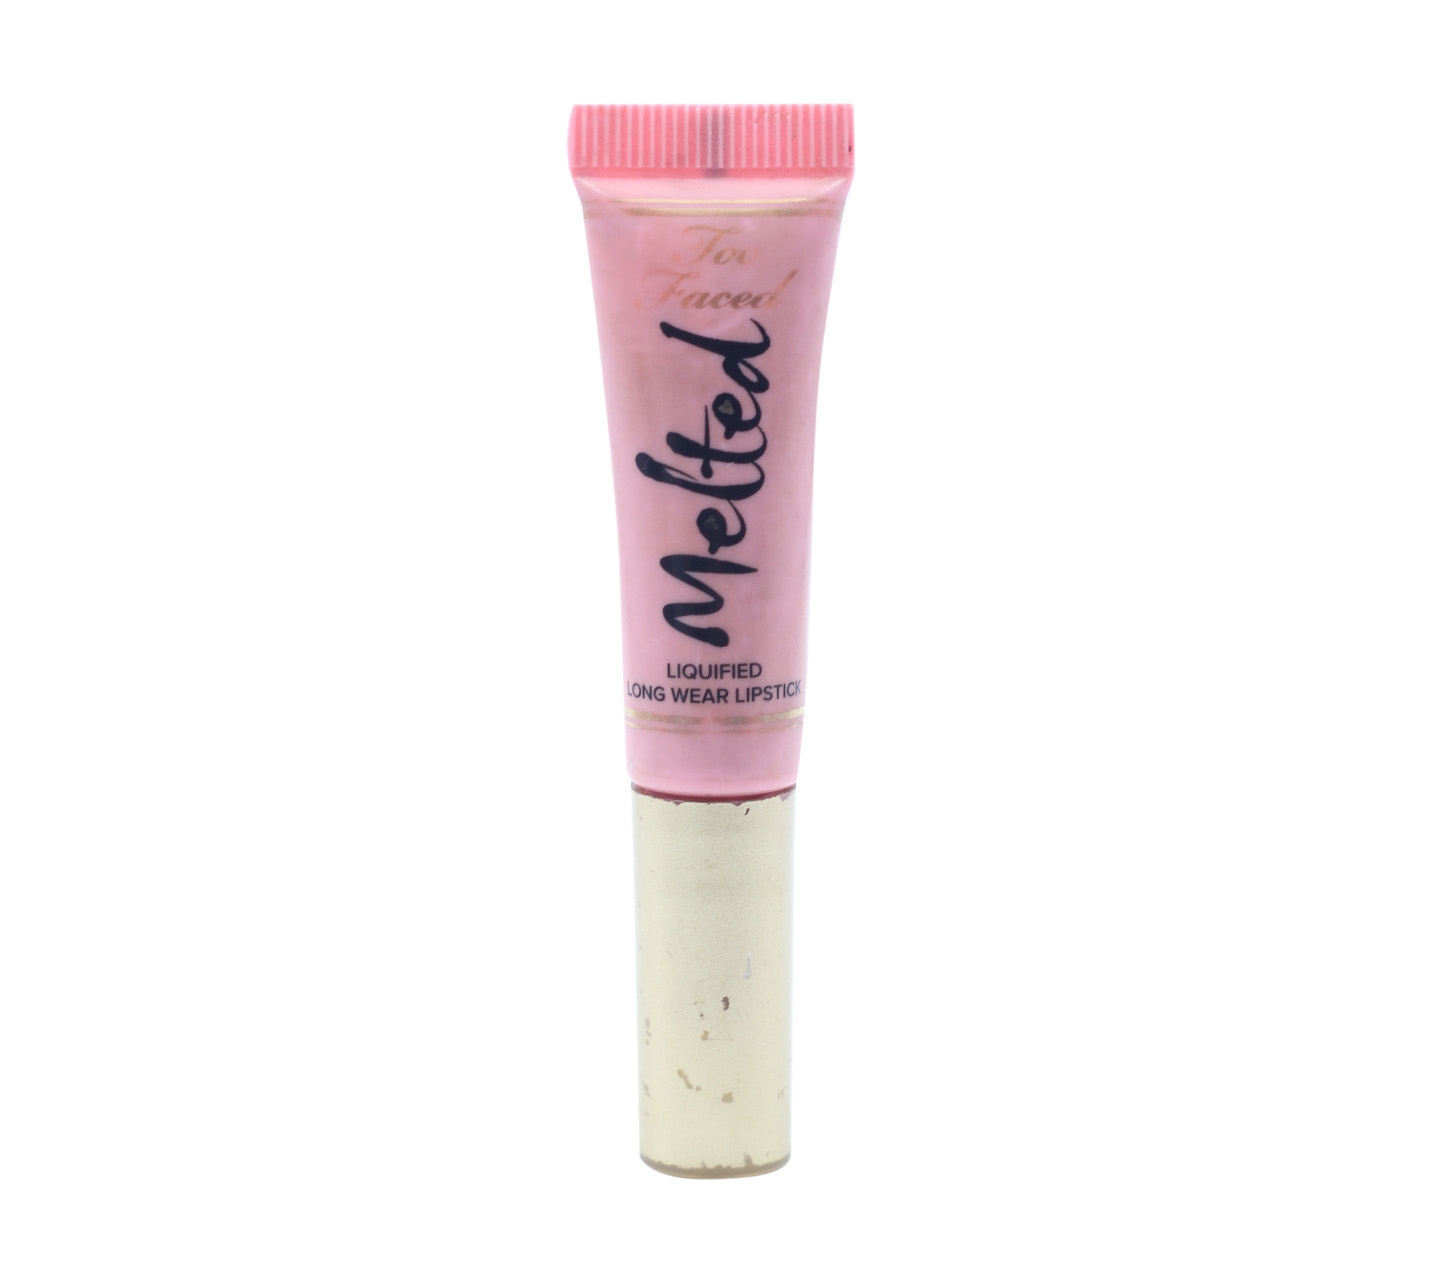 Too faced Melted Peony Liquified Long Wear Lipstick